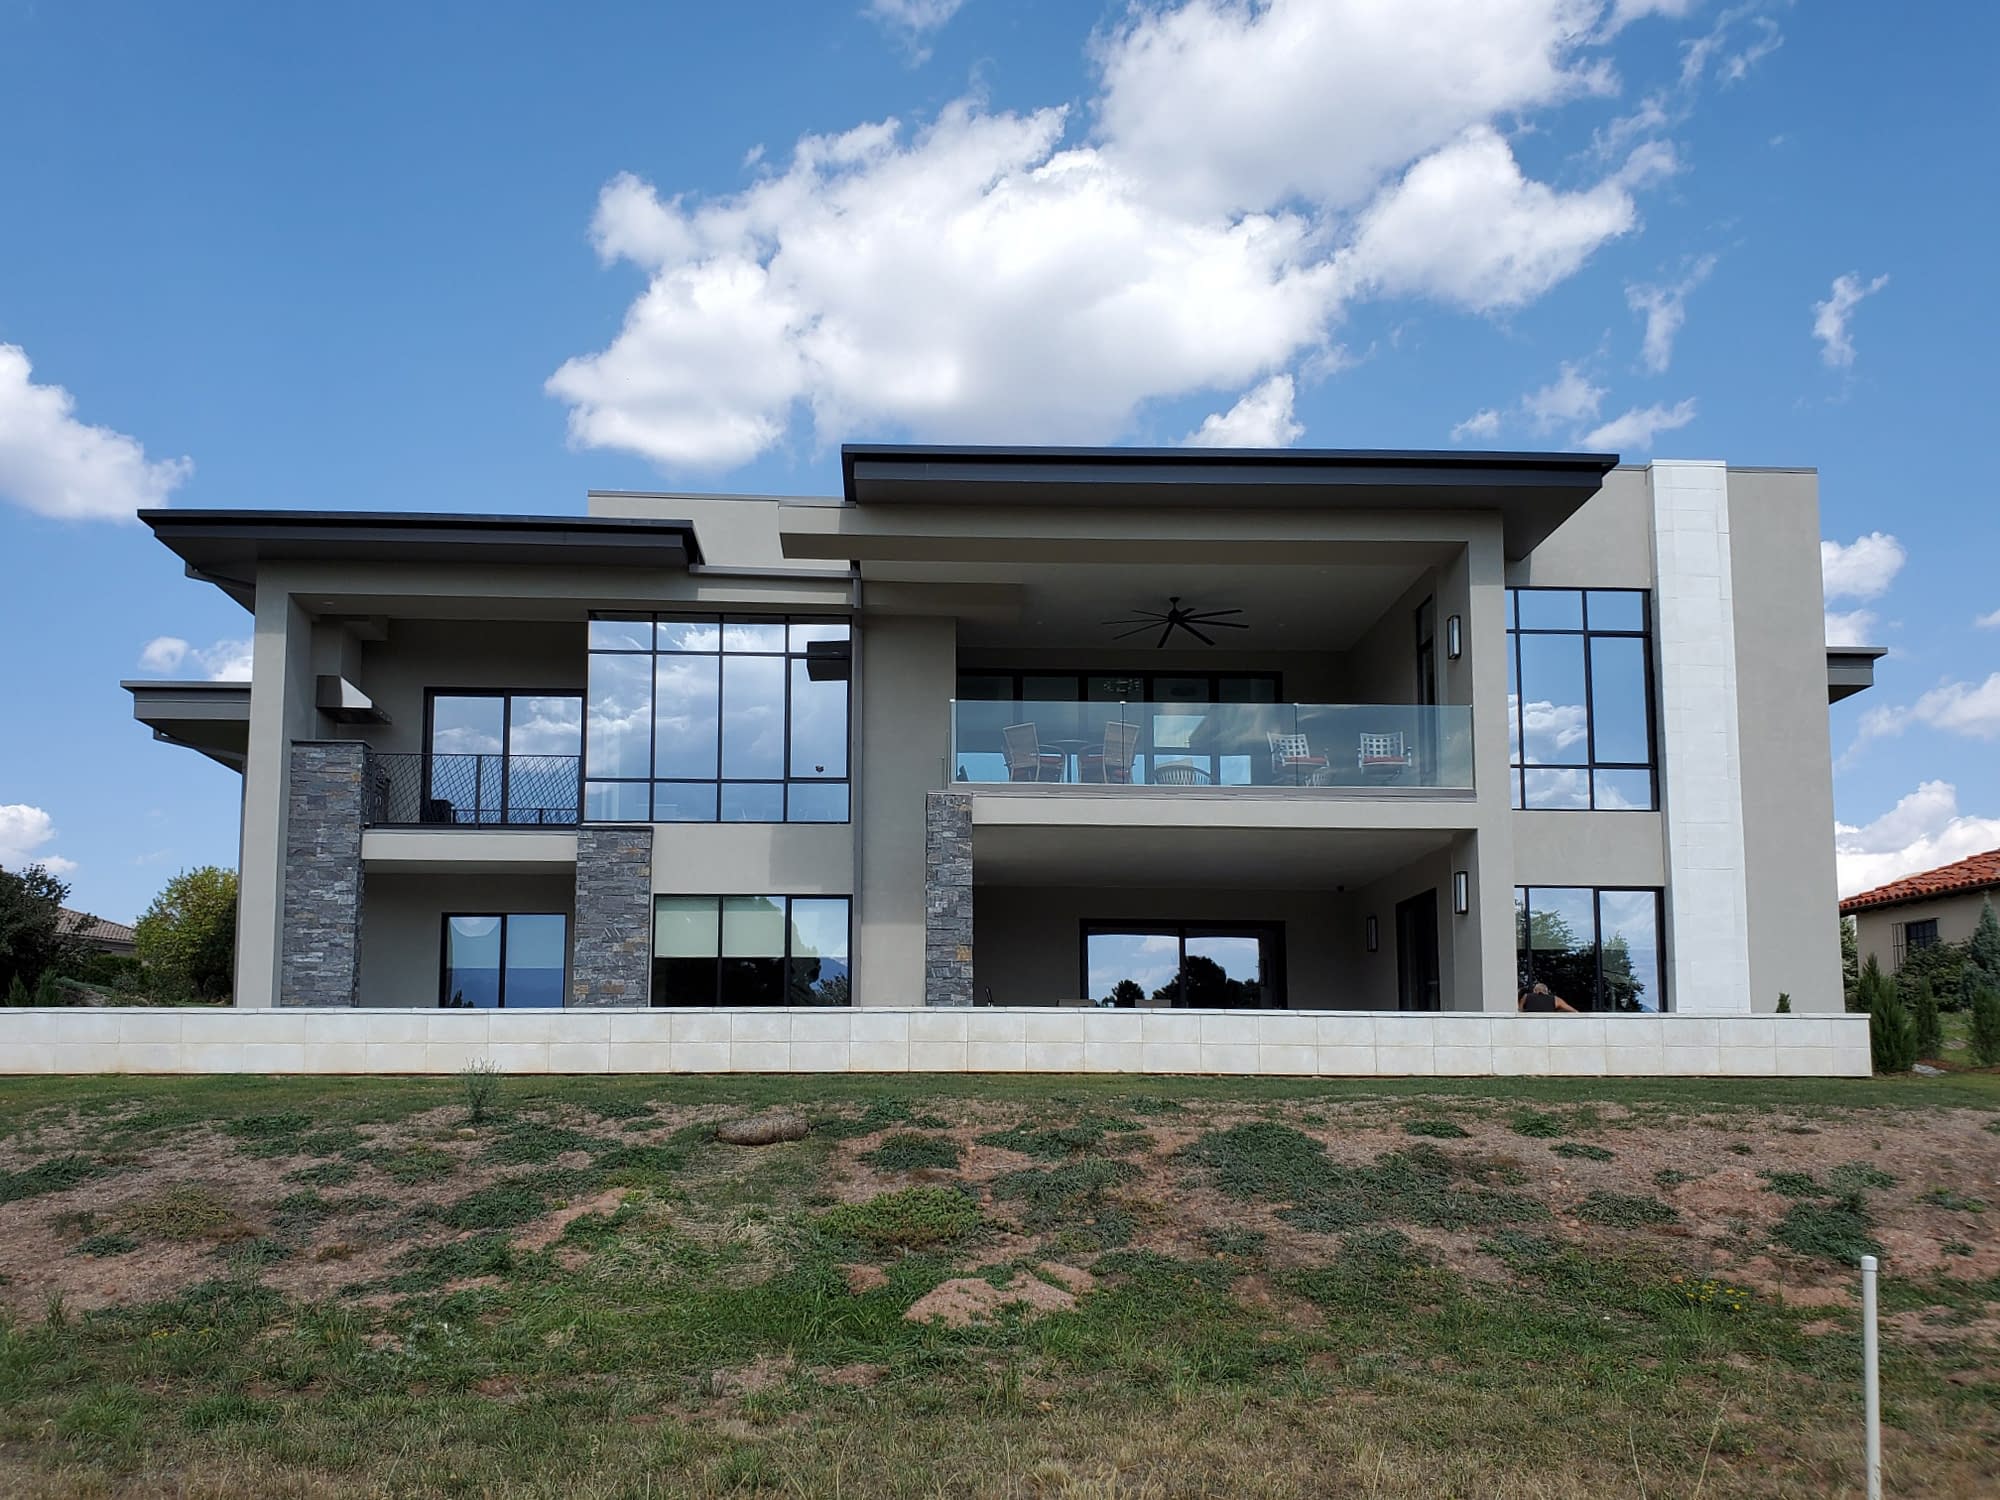 Floor to ceiling custom aluminum walls of window and doors are showcased in this Colorado home.